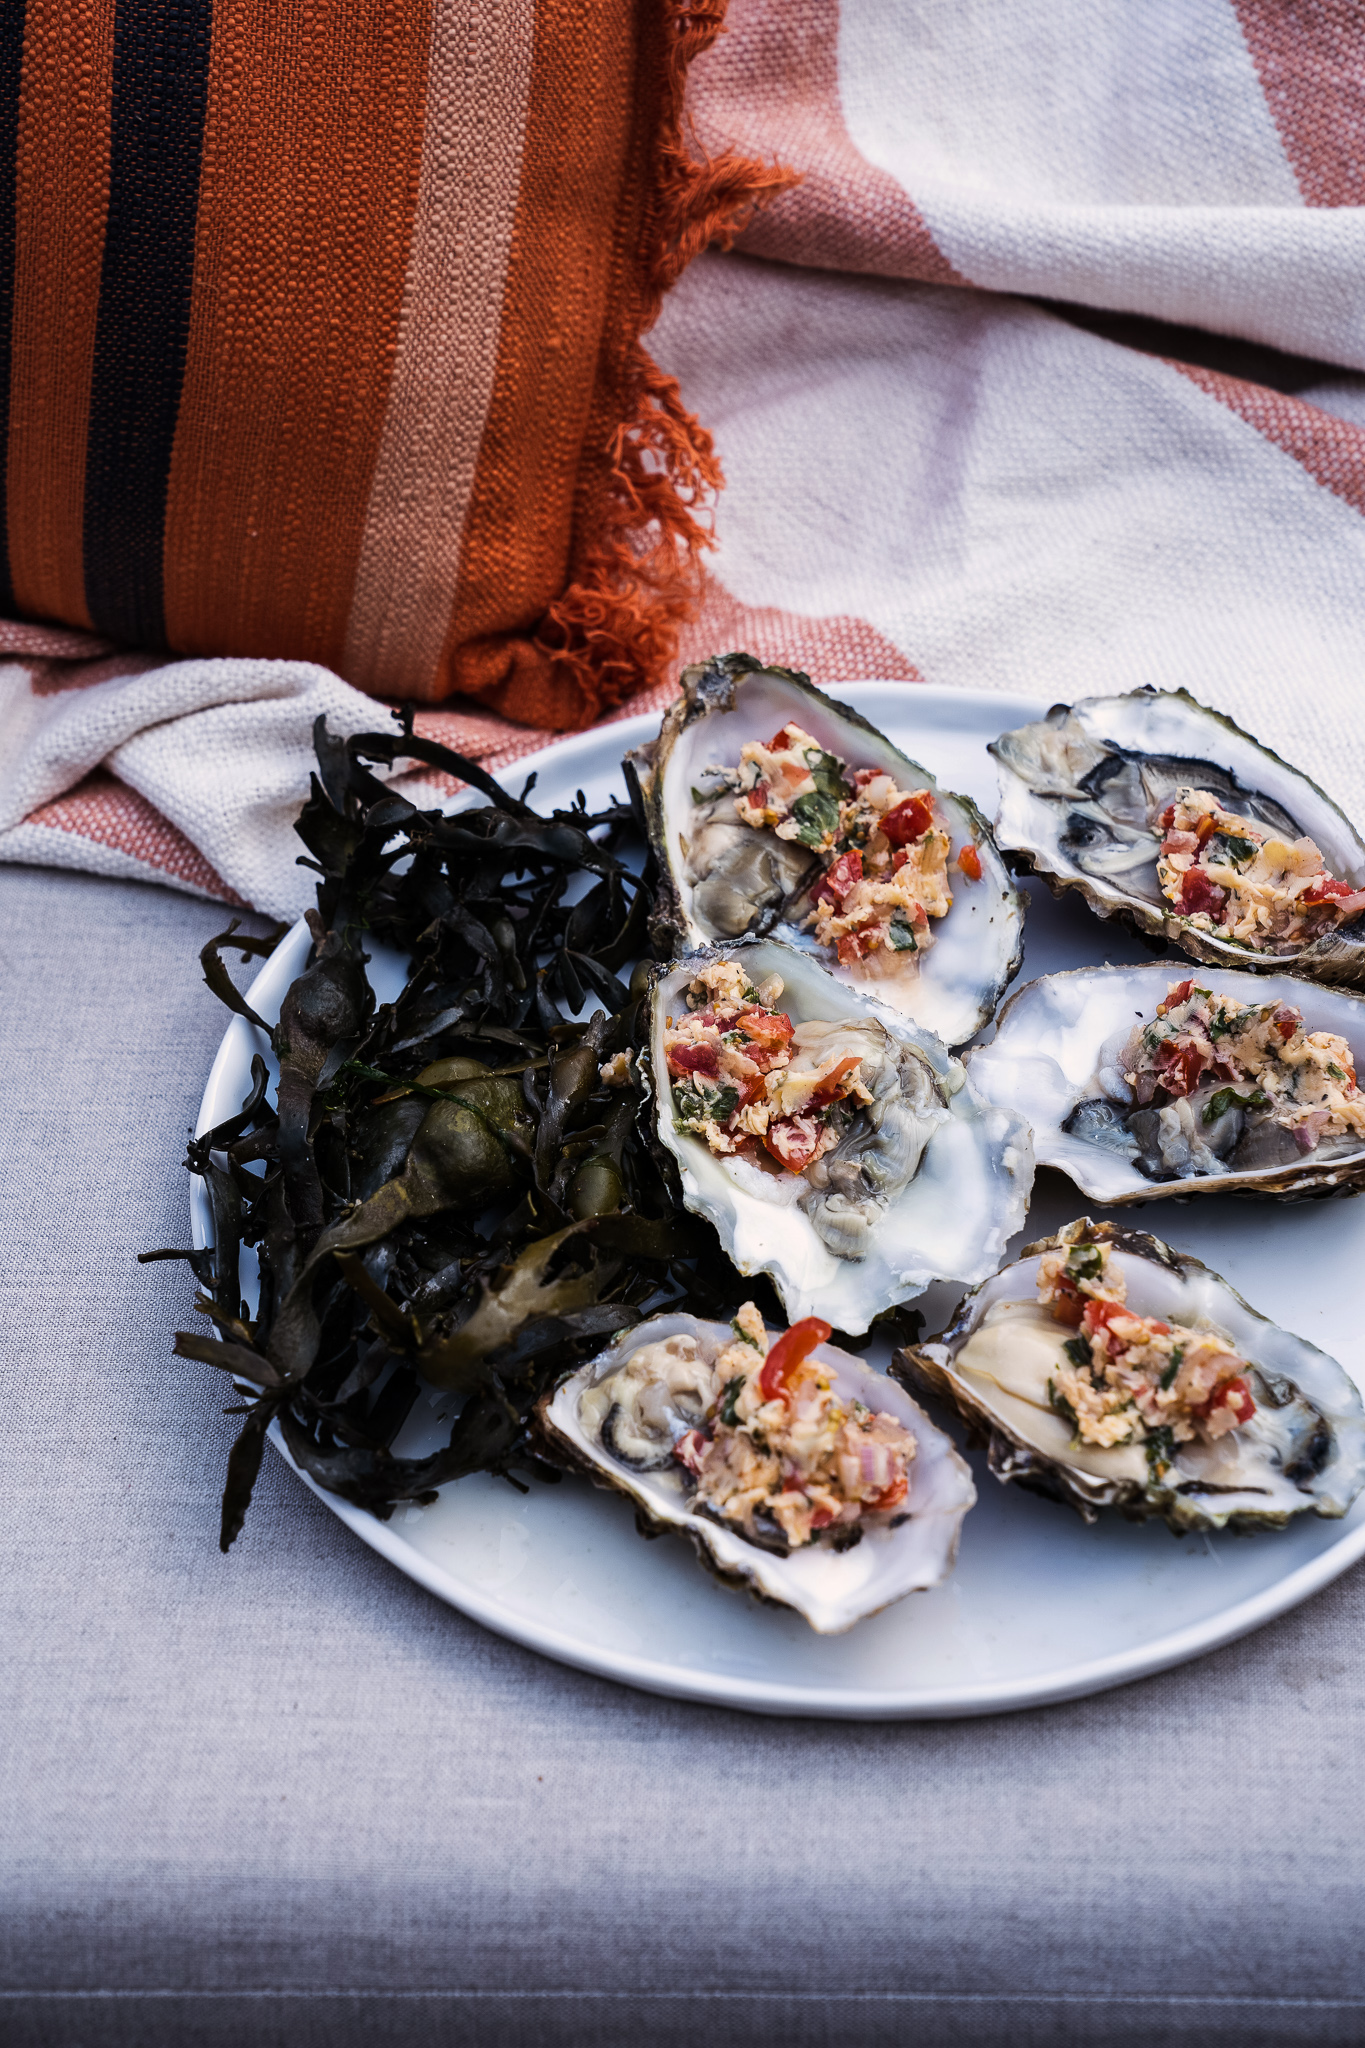 Barbecue Oesters met Salsaboter